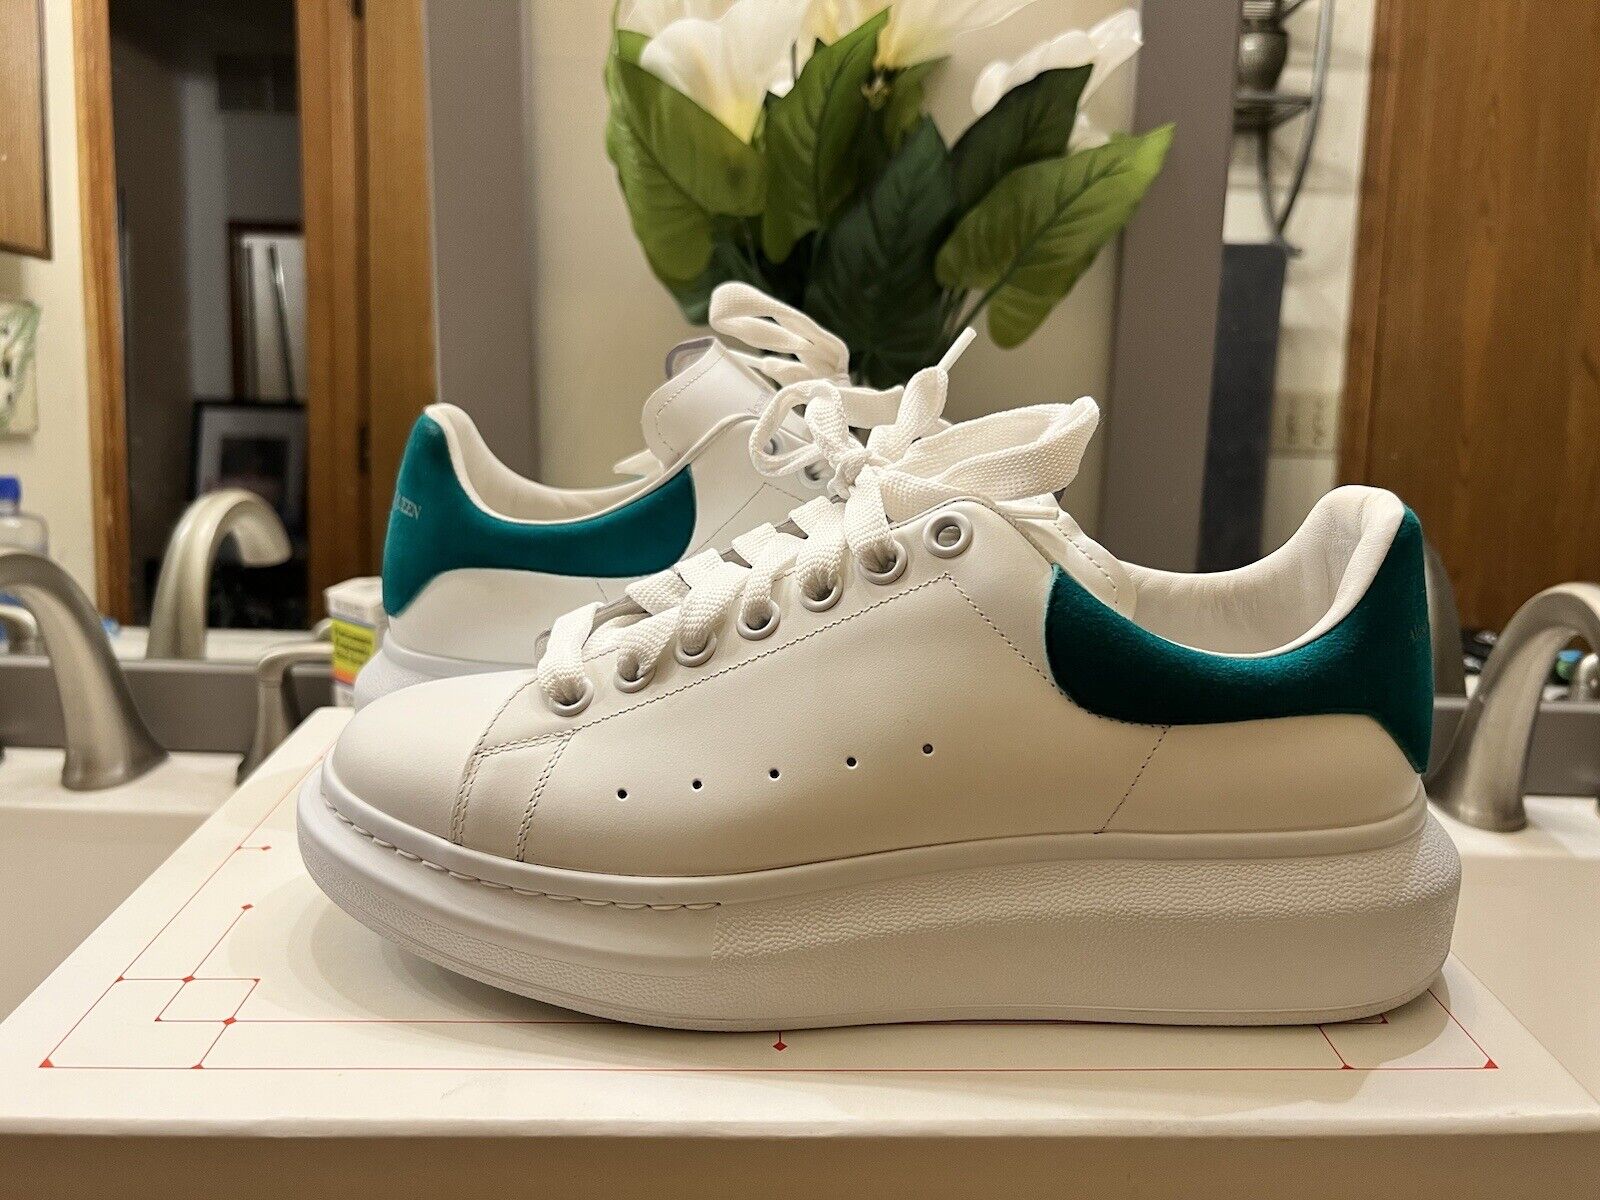 Alexander McQueen Oversized Sneaker \'White Teal\' Size 42 EU Size 9 US Almost DS